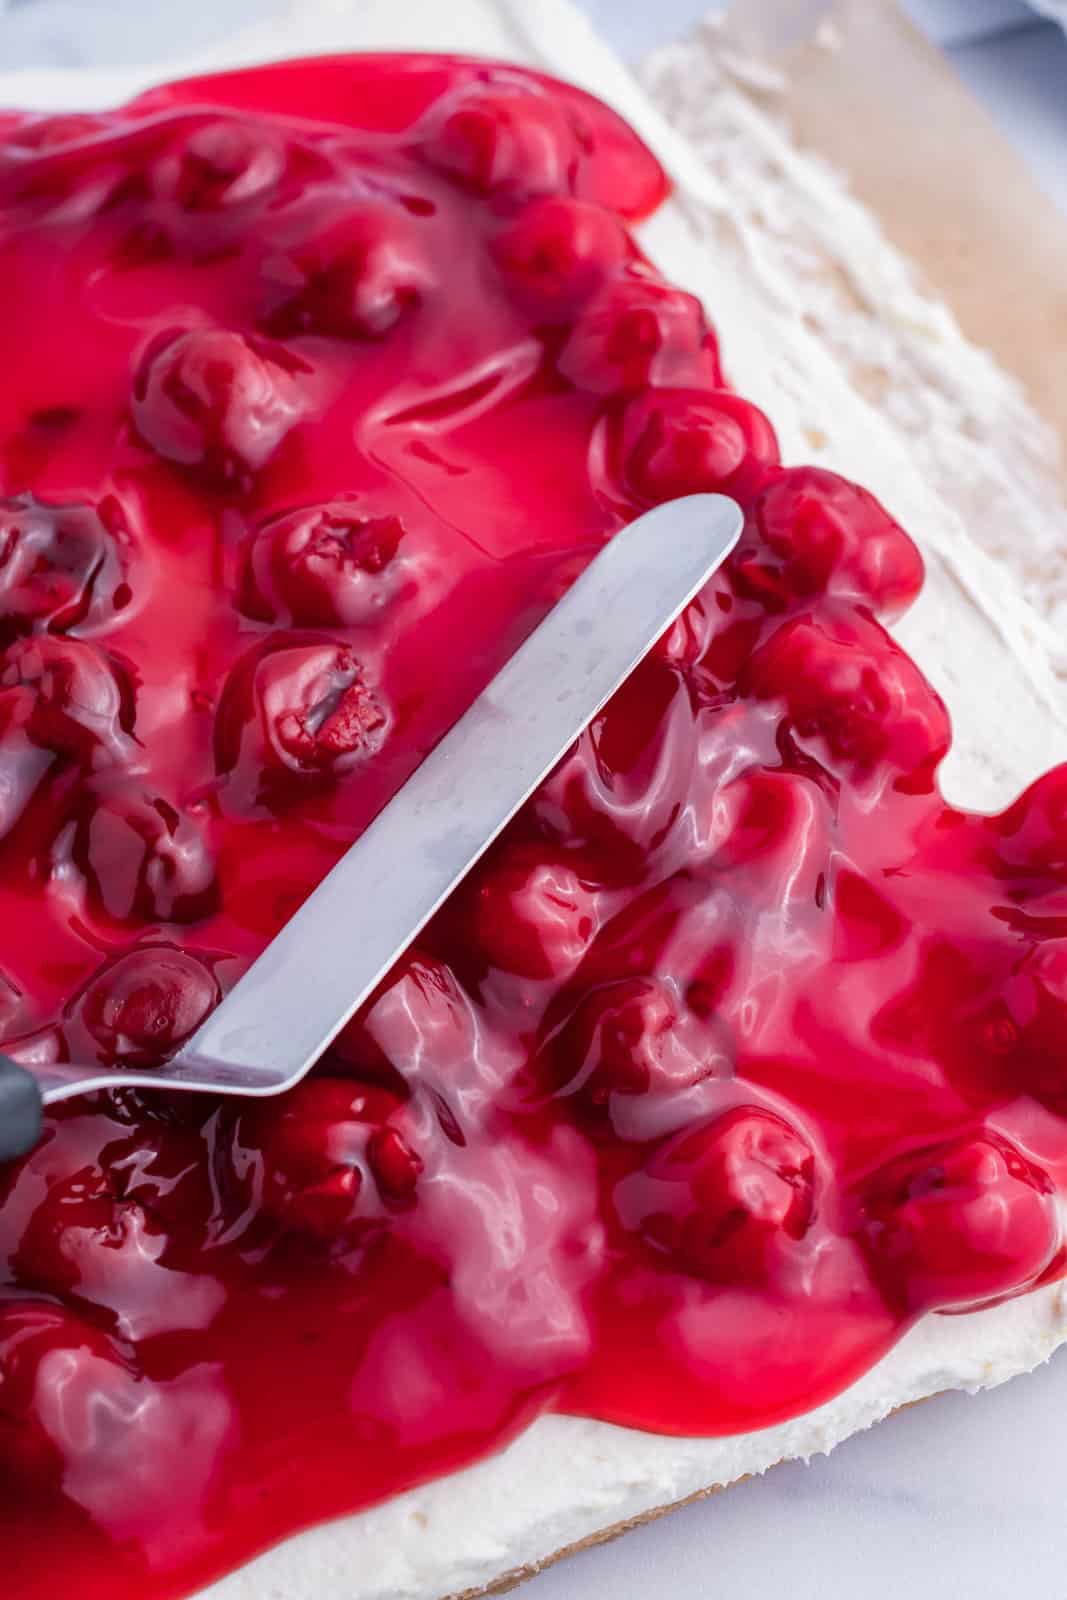 A cherry pie filling being spread out over a whipped cream mixture in a baking dish.